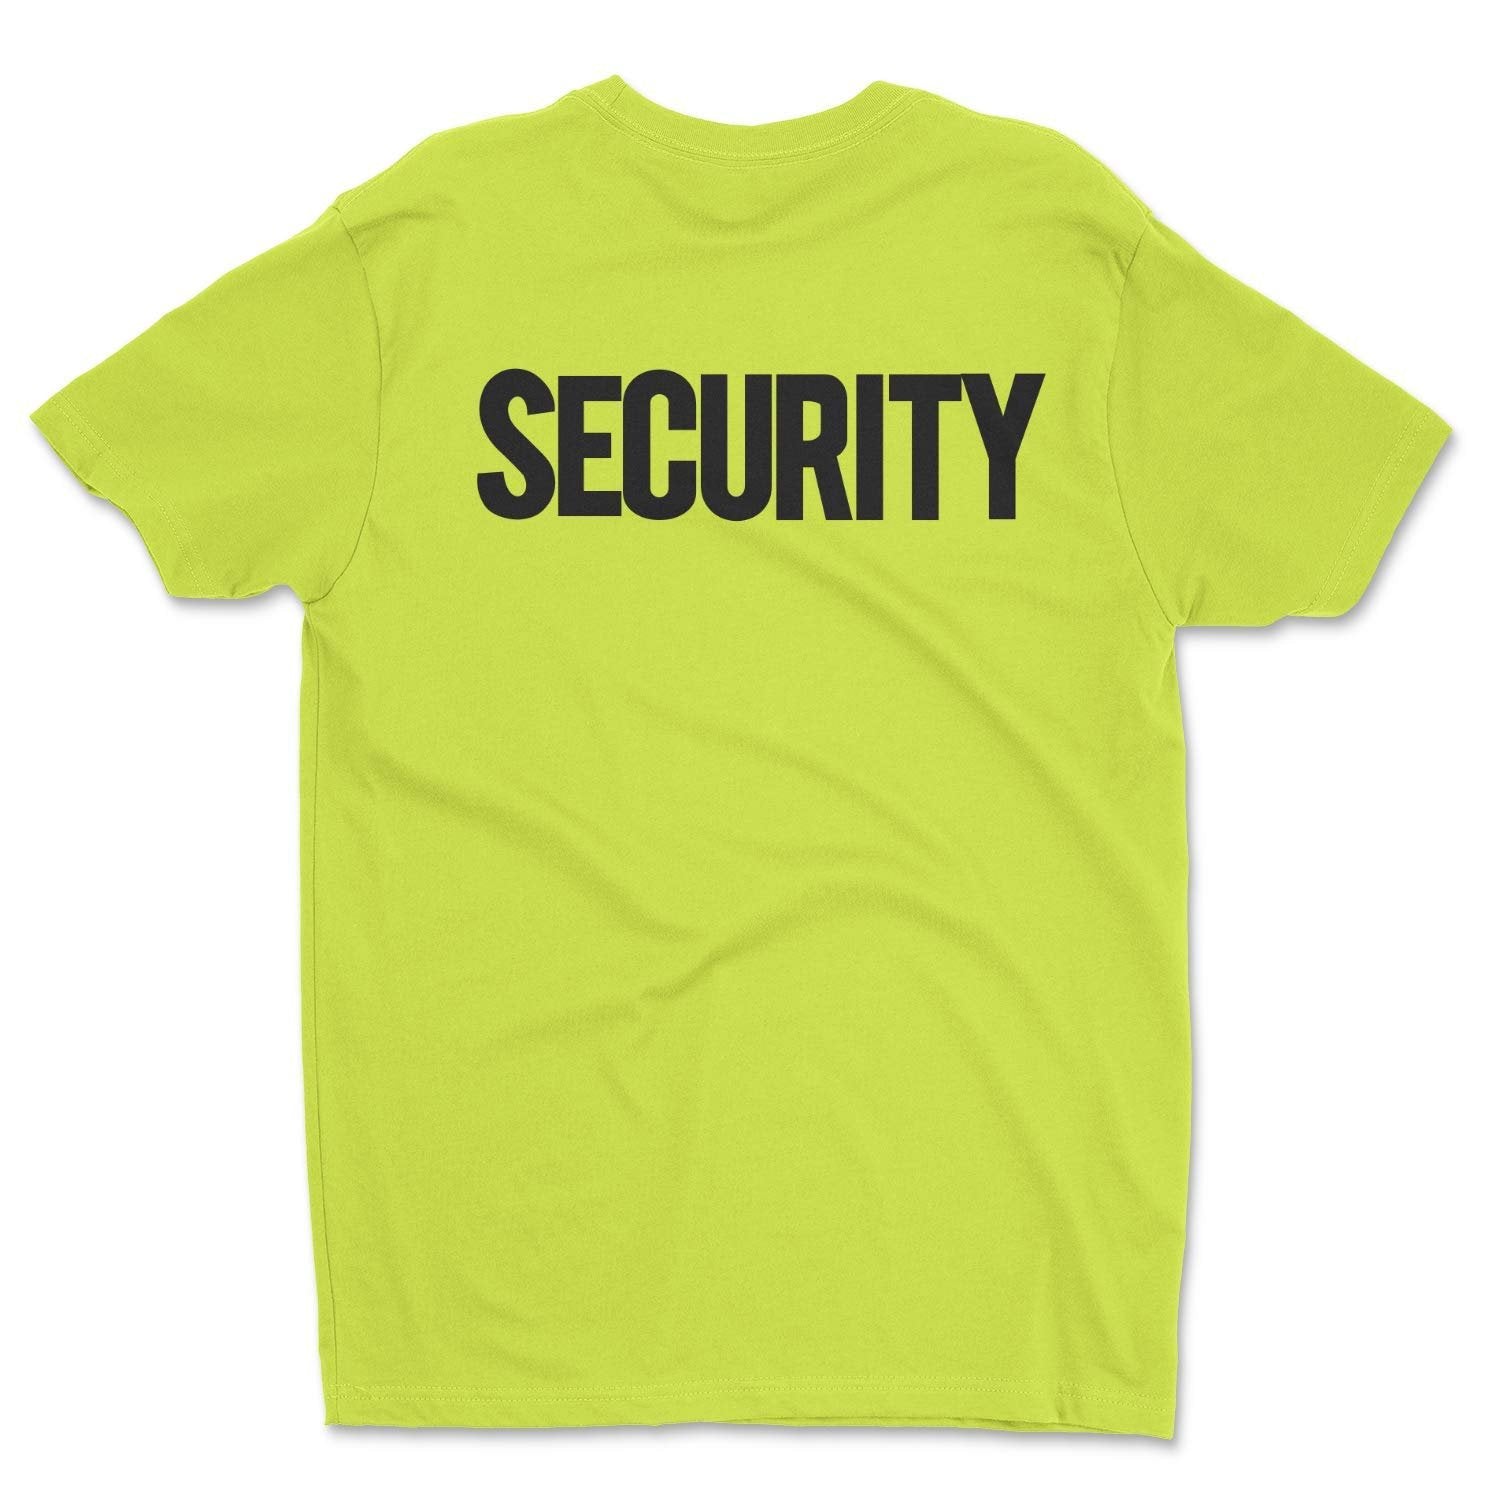 Men's Security T-Shirt (Chest & Back Print, Safety Green/Black)